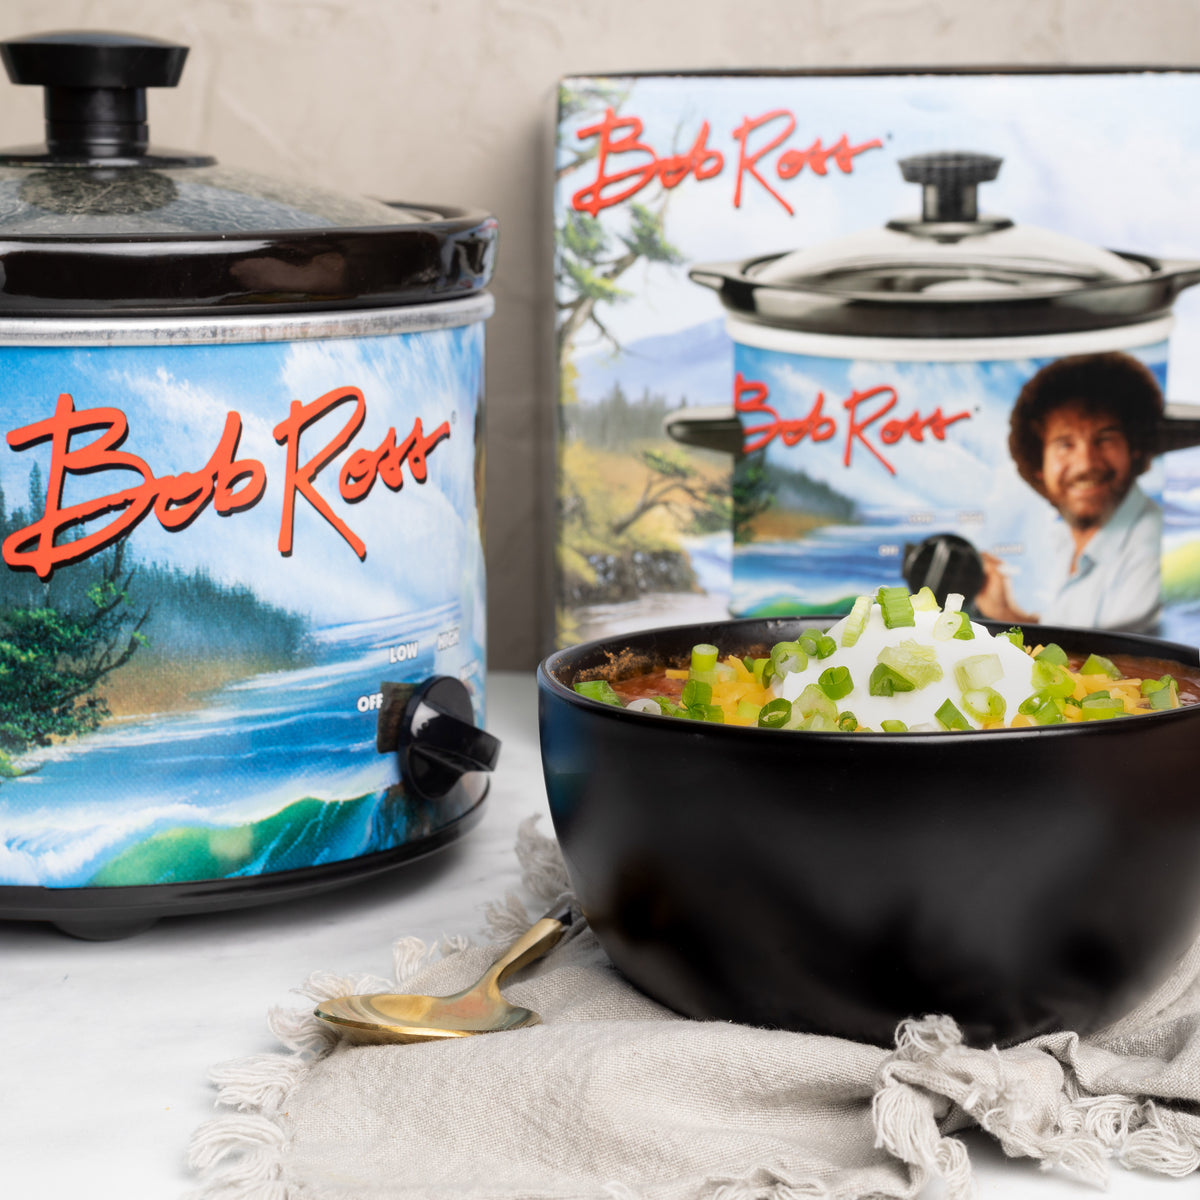 Bob Ross slow cooker on counter with chili. Product box in in the background